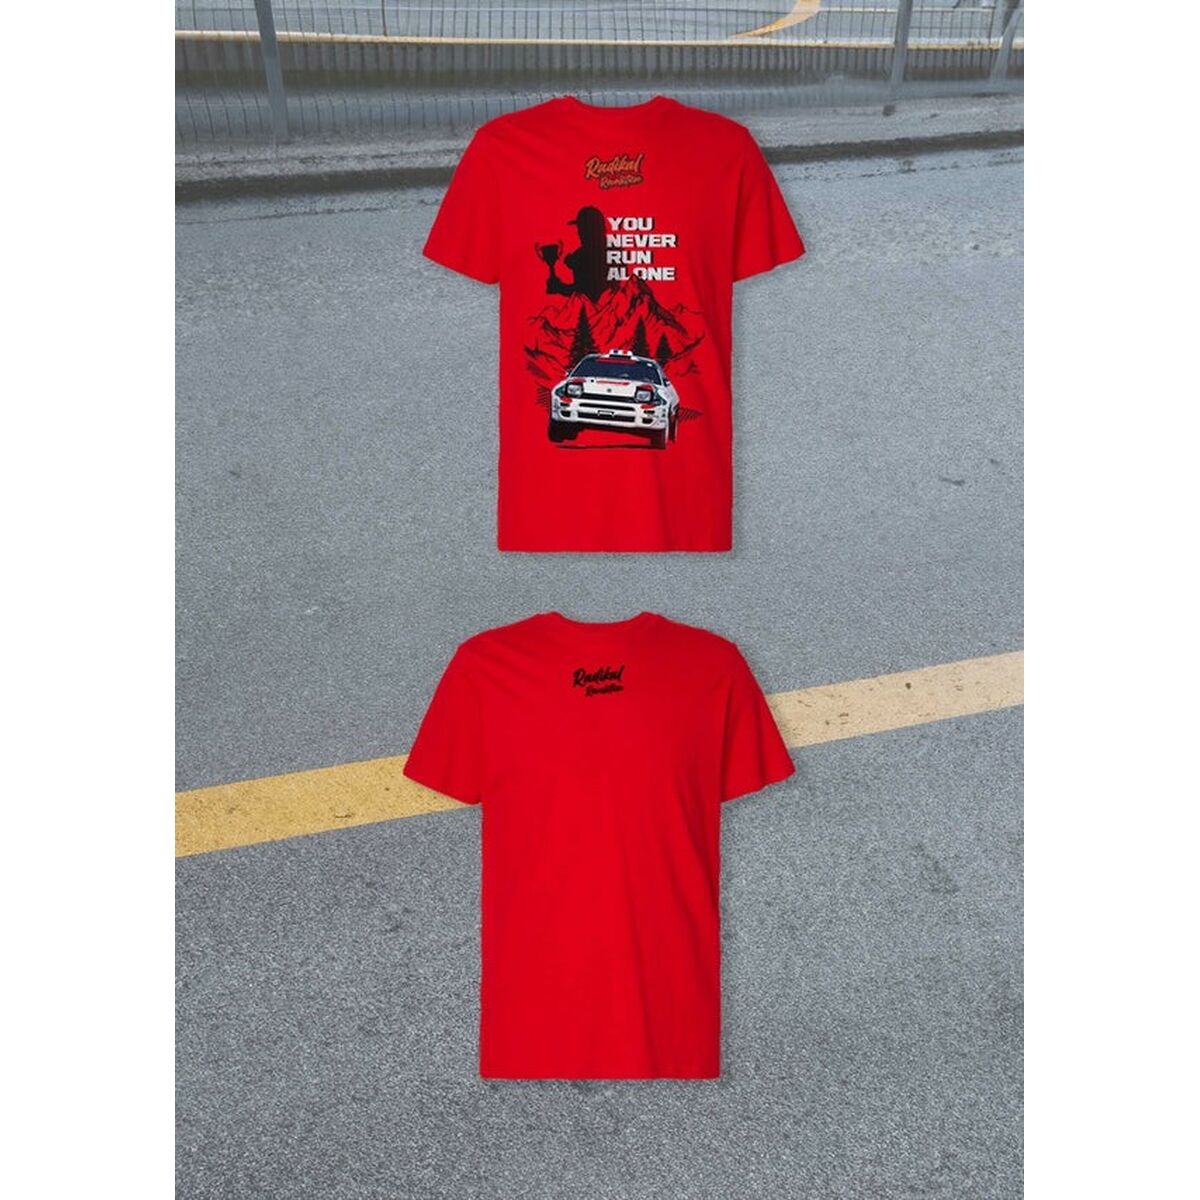 T-shirt à manches courtes homme RADIKAL YOU NEVER RUN ALONE Rouge XXL